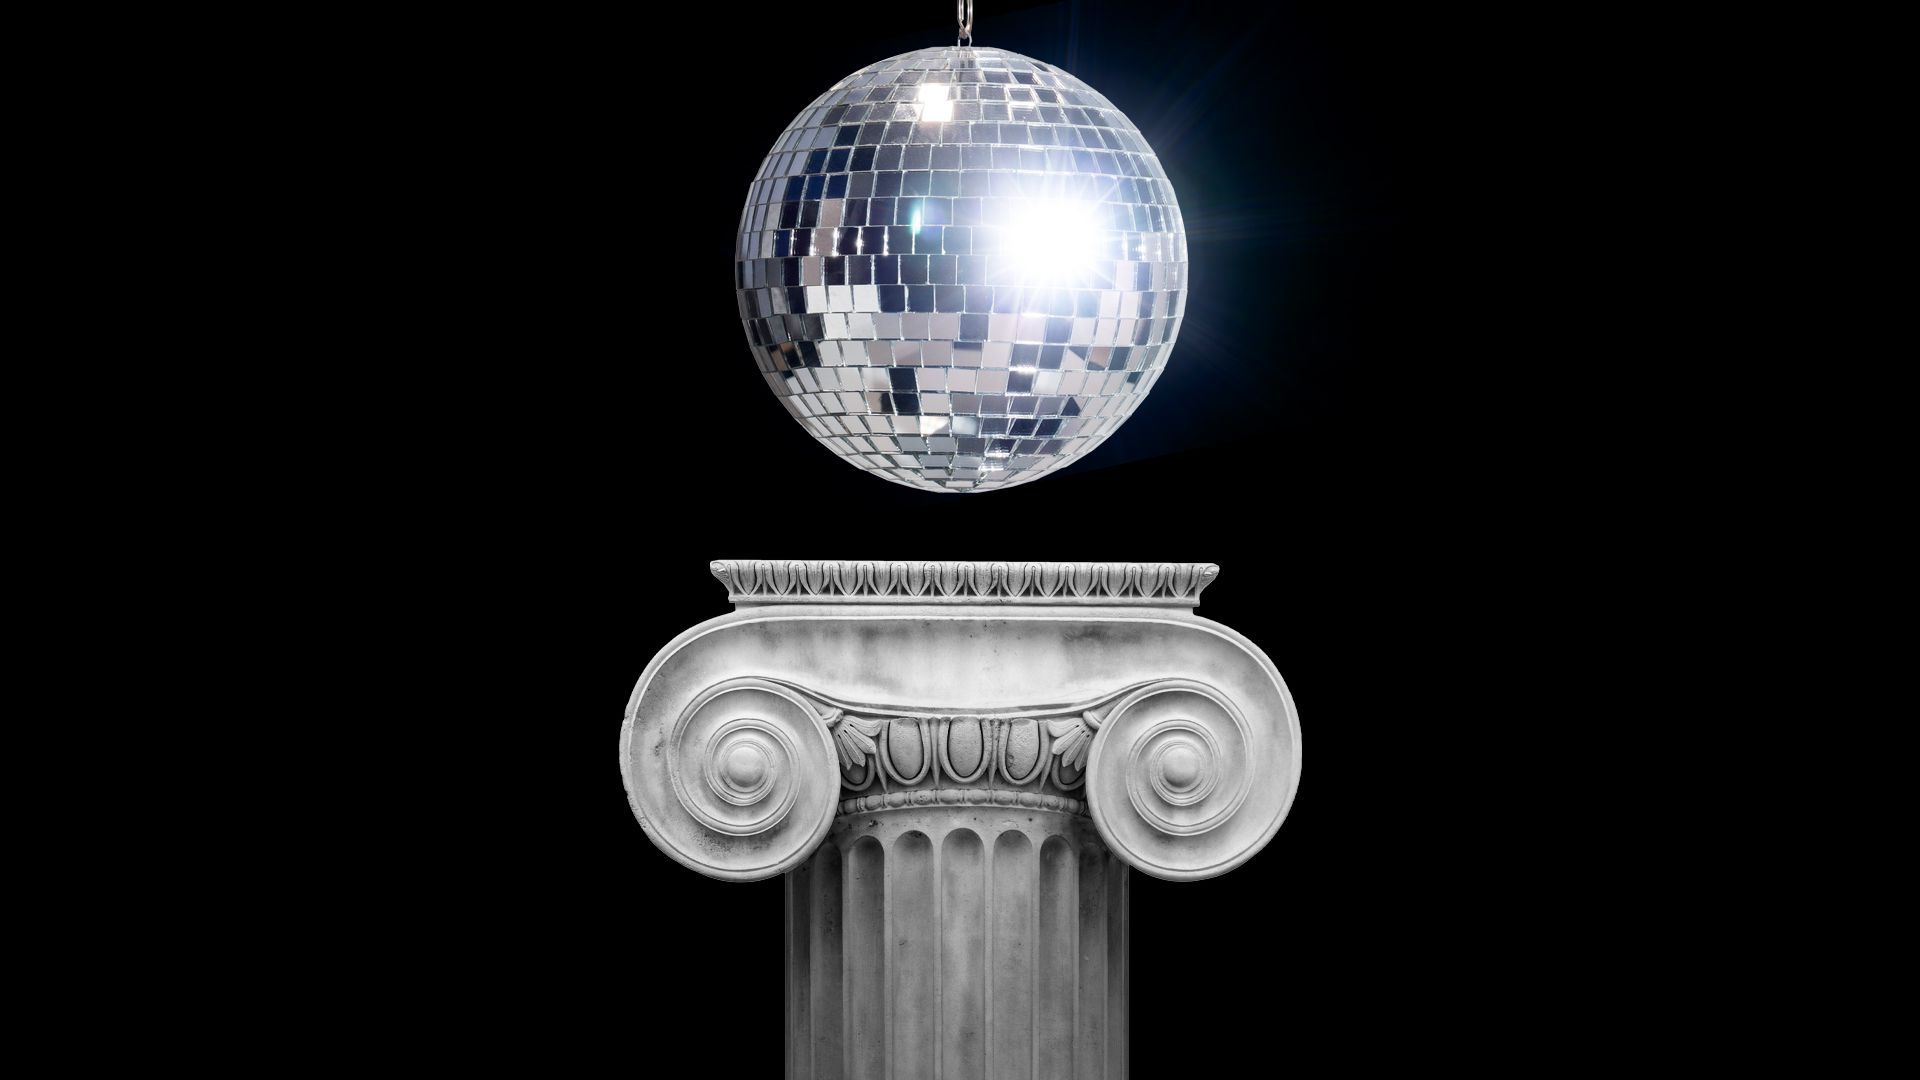 Illustration of a disco ball hanging above an ionic column